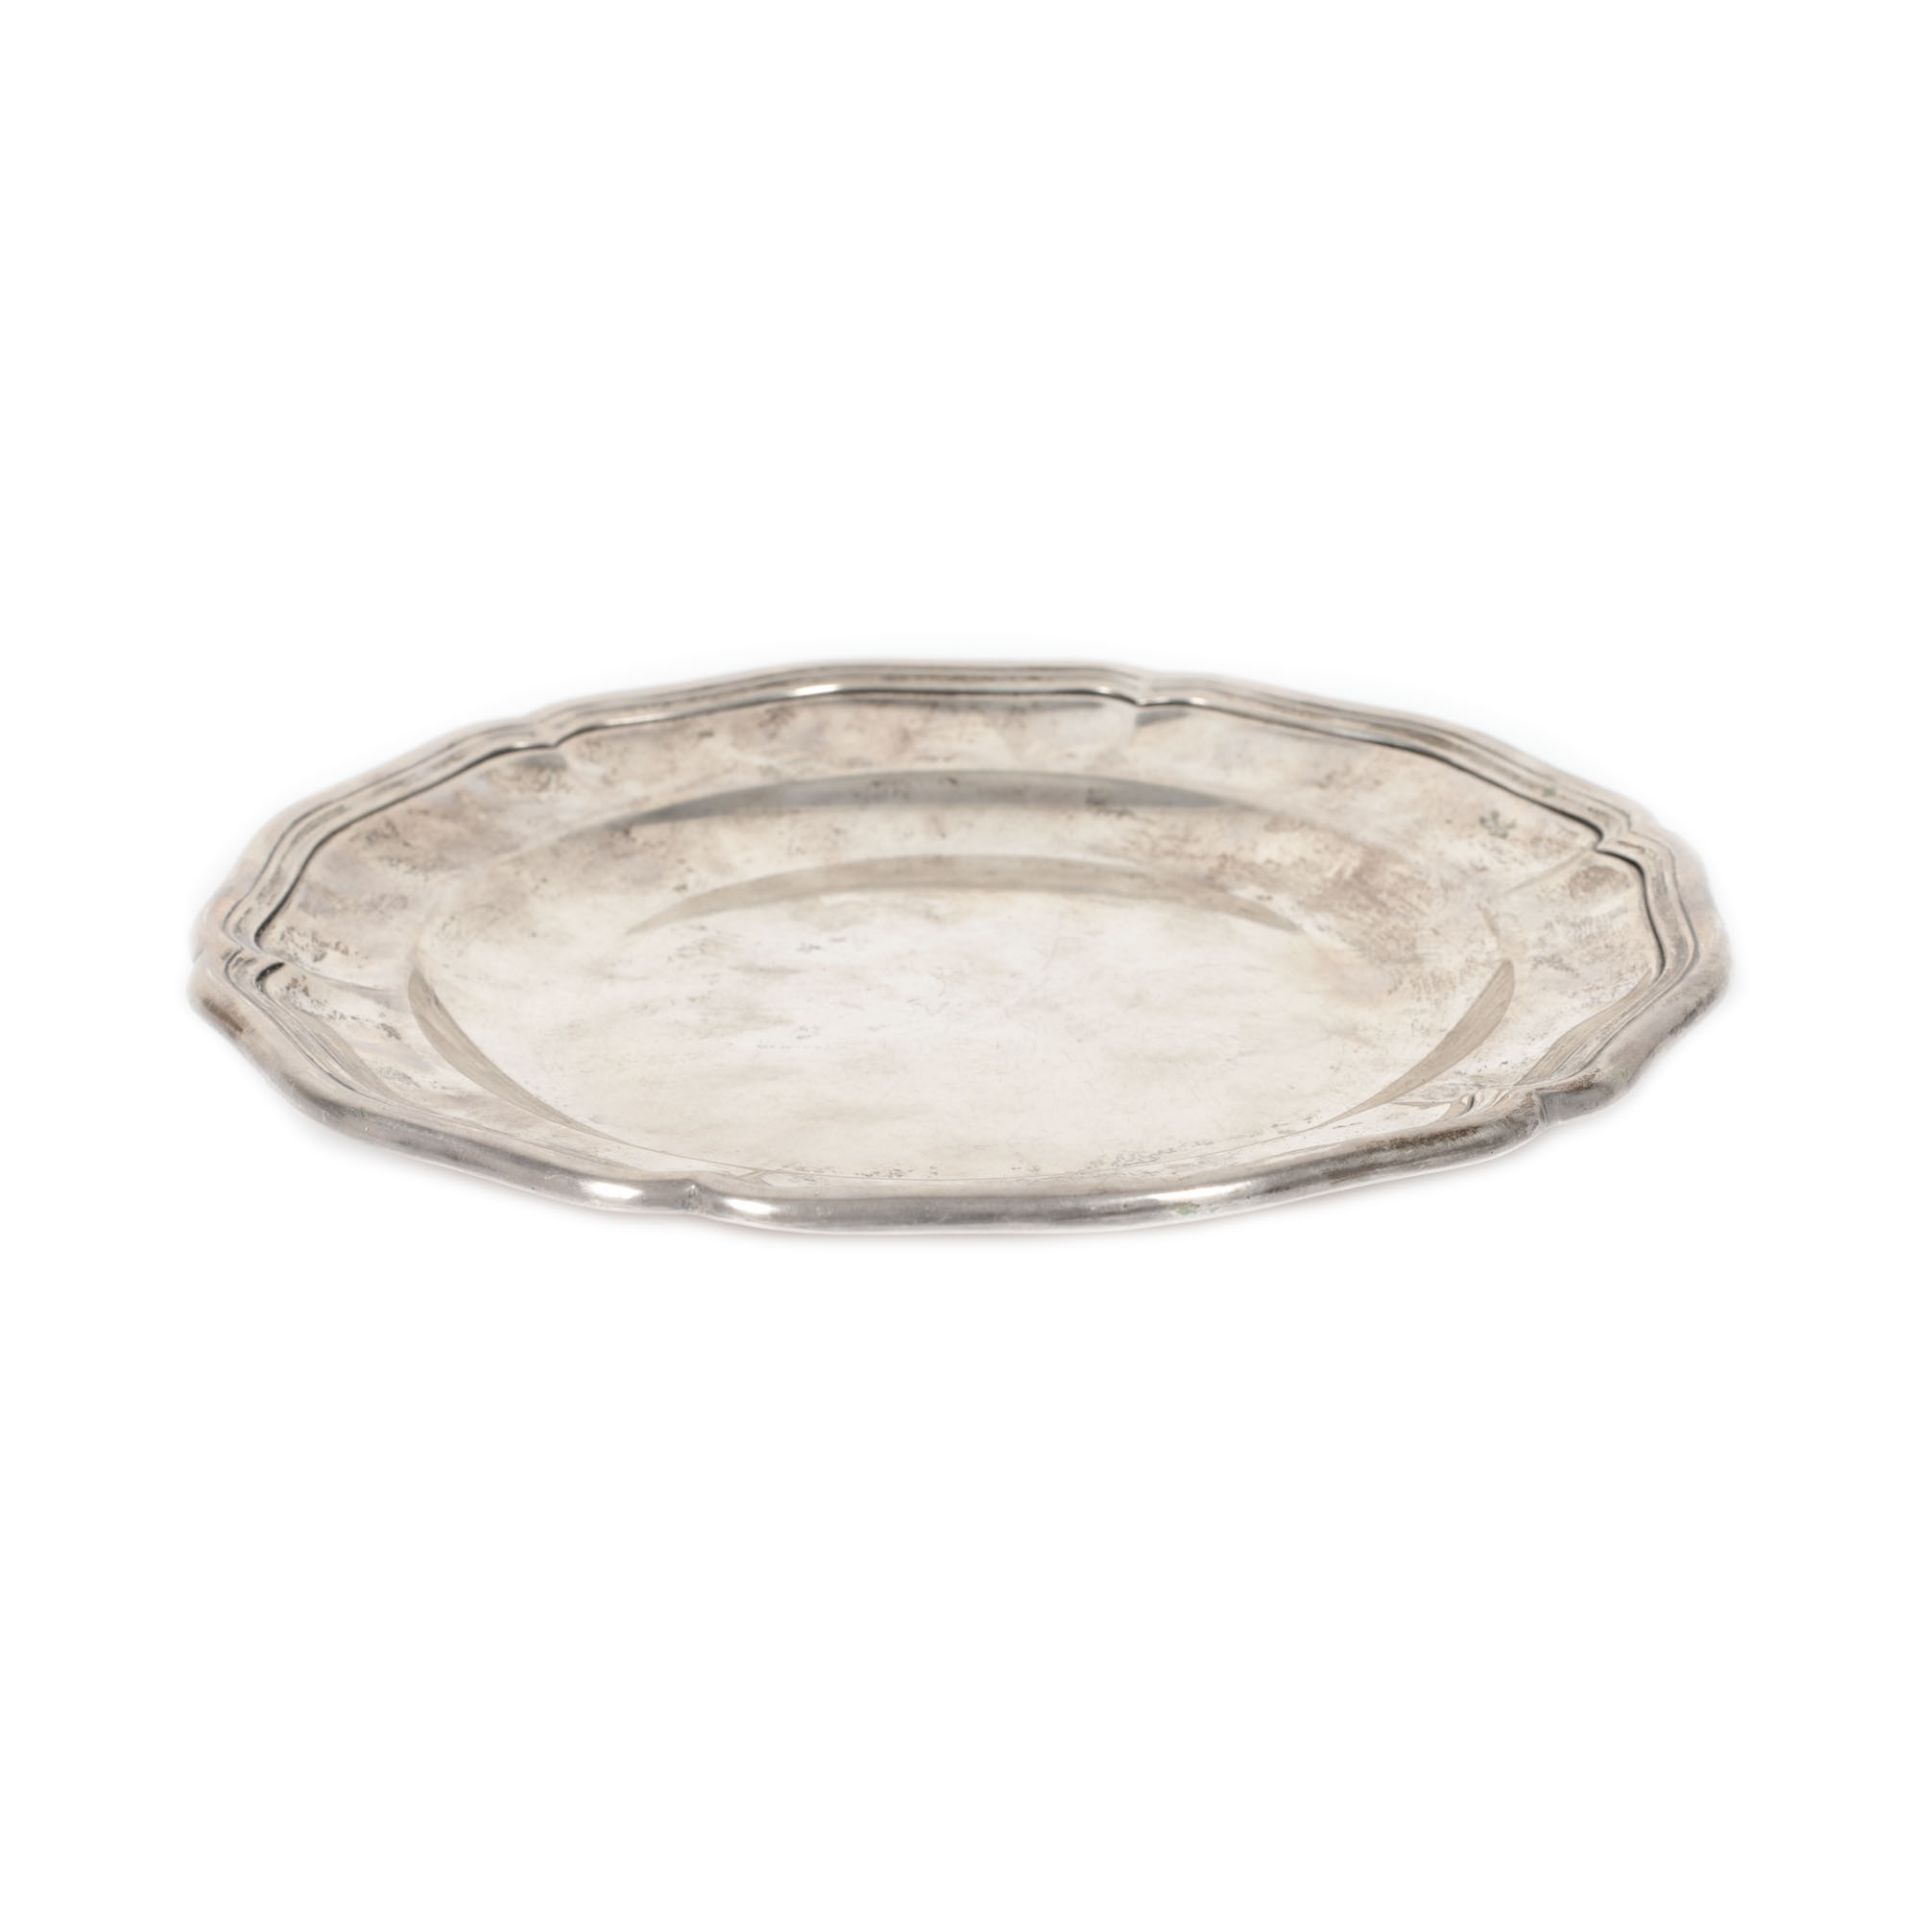 Romanian workshop, Silver plate, approx. 1930 - Image 2 of 3